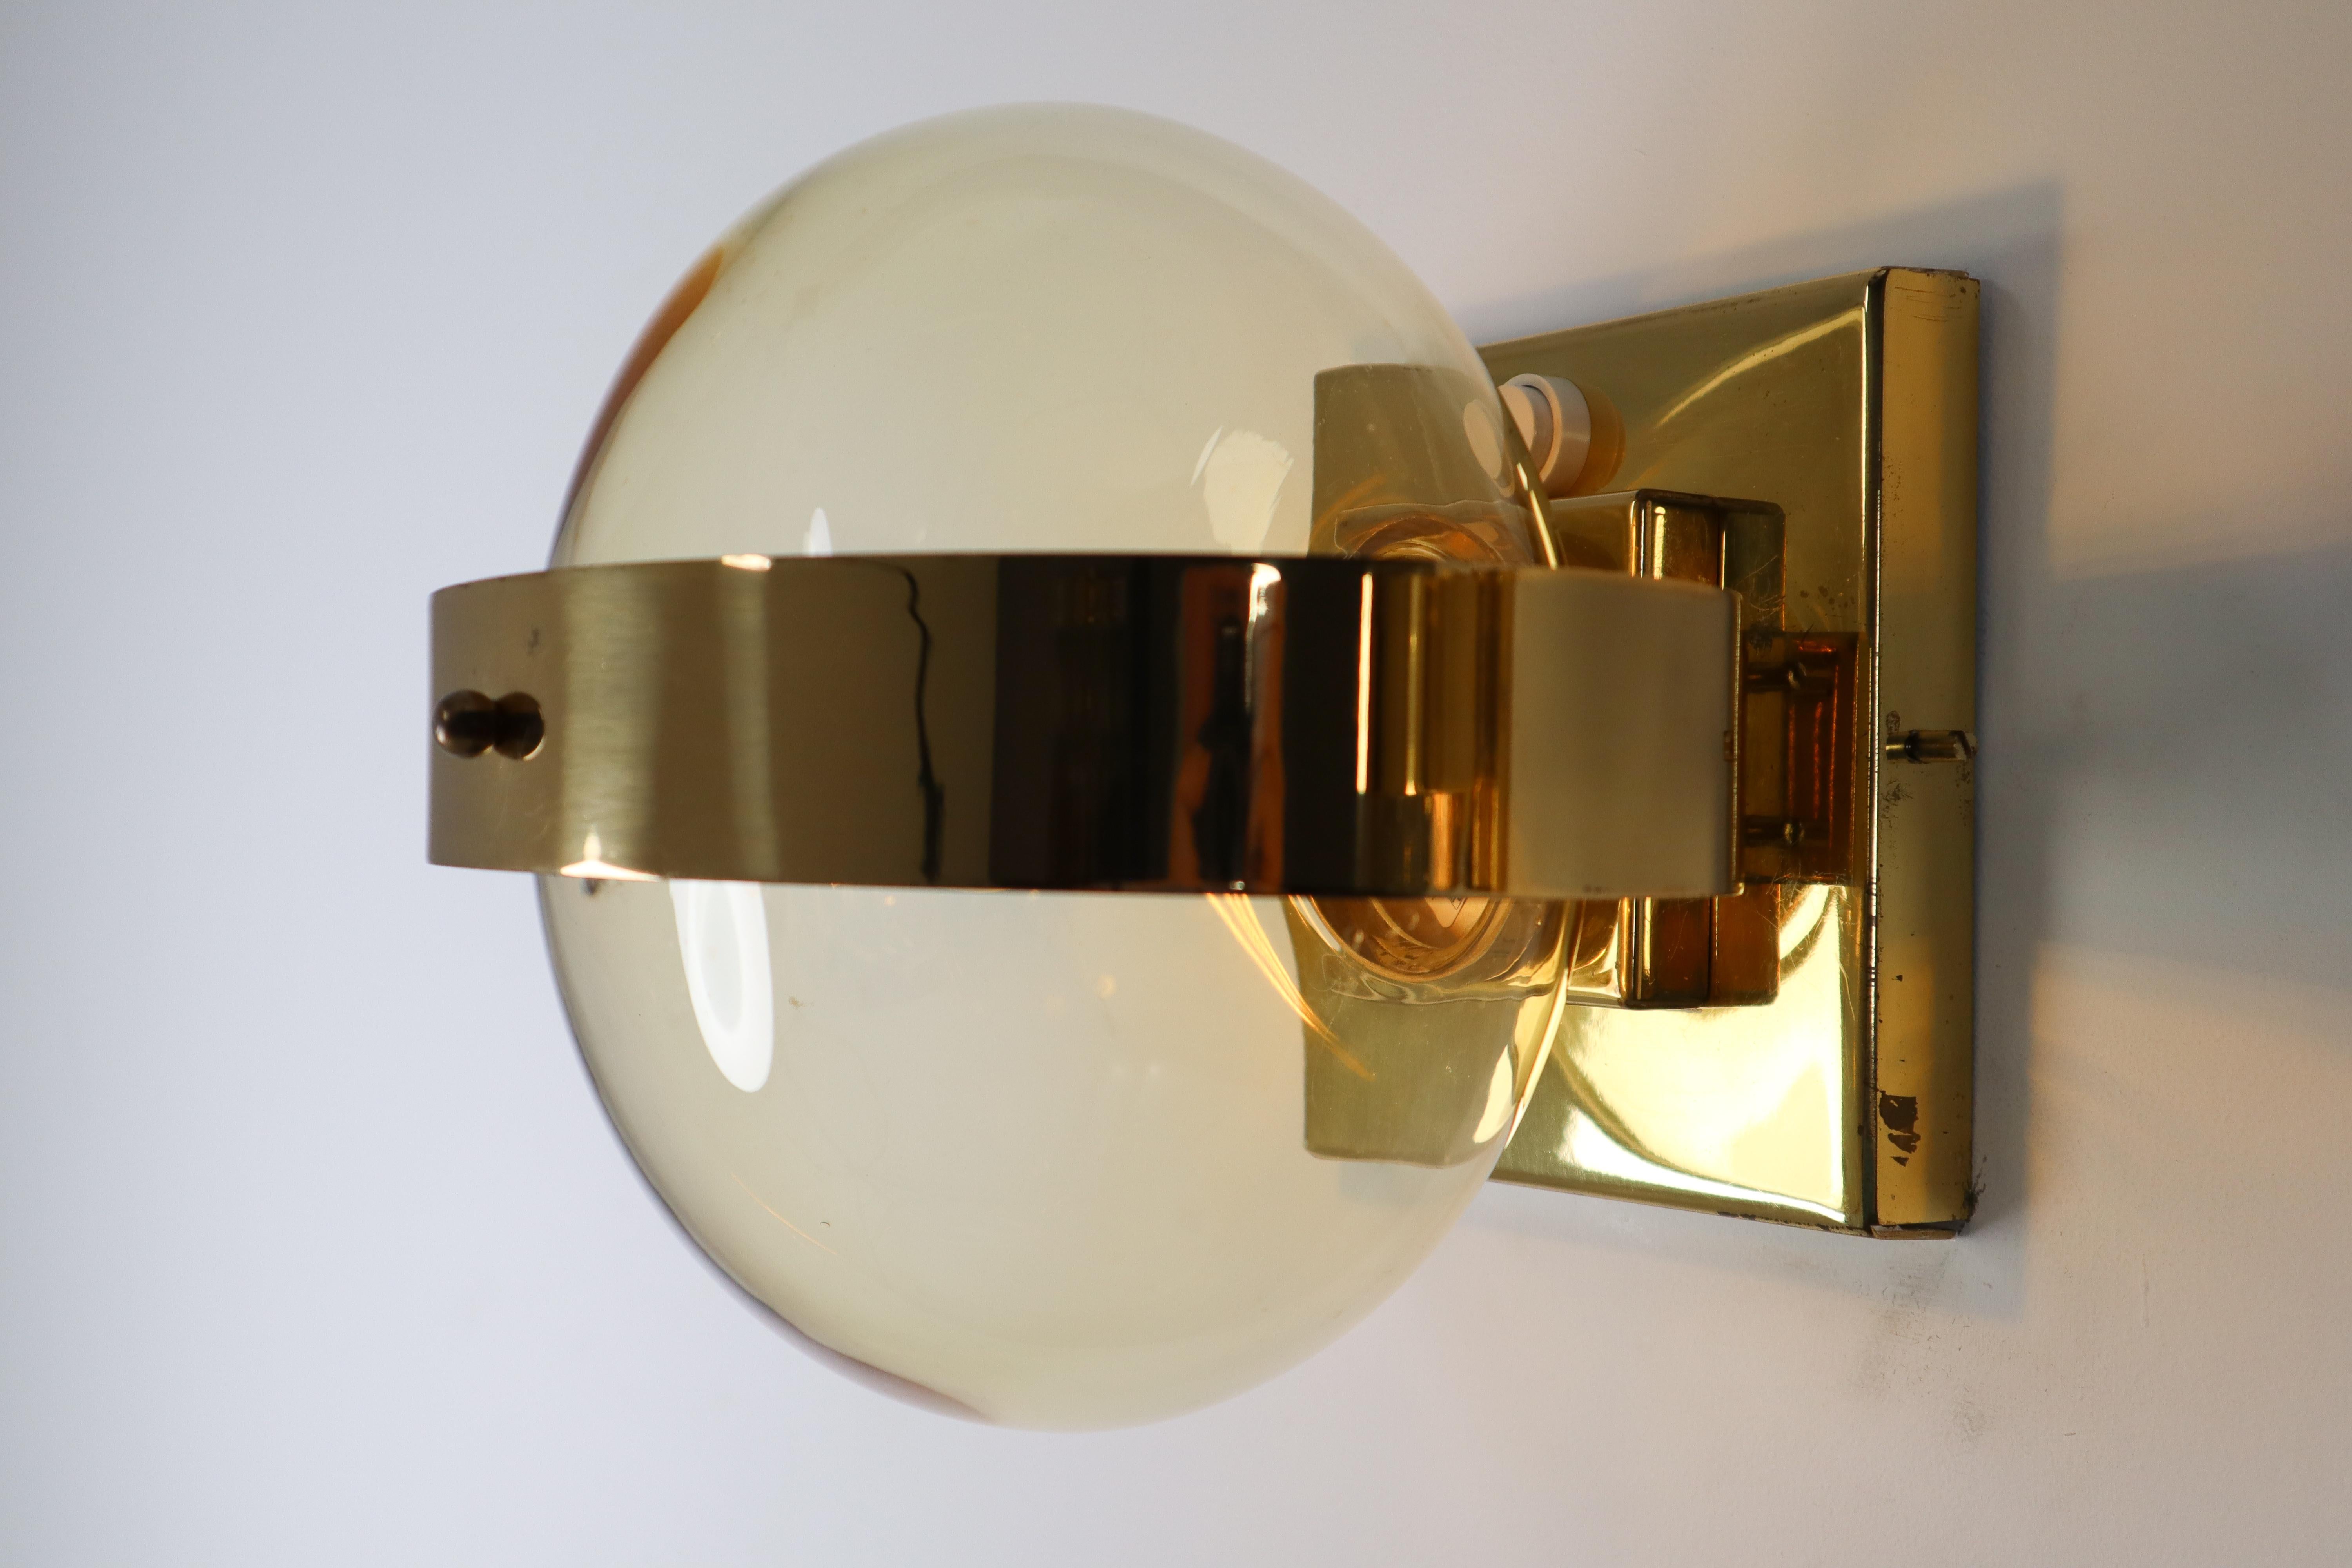 Set of 12 wall sconces - wall lights with square brass backplate and hand blowed glass globe. The pleasant light it spreads is very atmospheric, these wall scones will contribute to a luxurious character of the (hotel-bar) interior. Perfect original